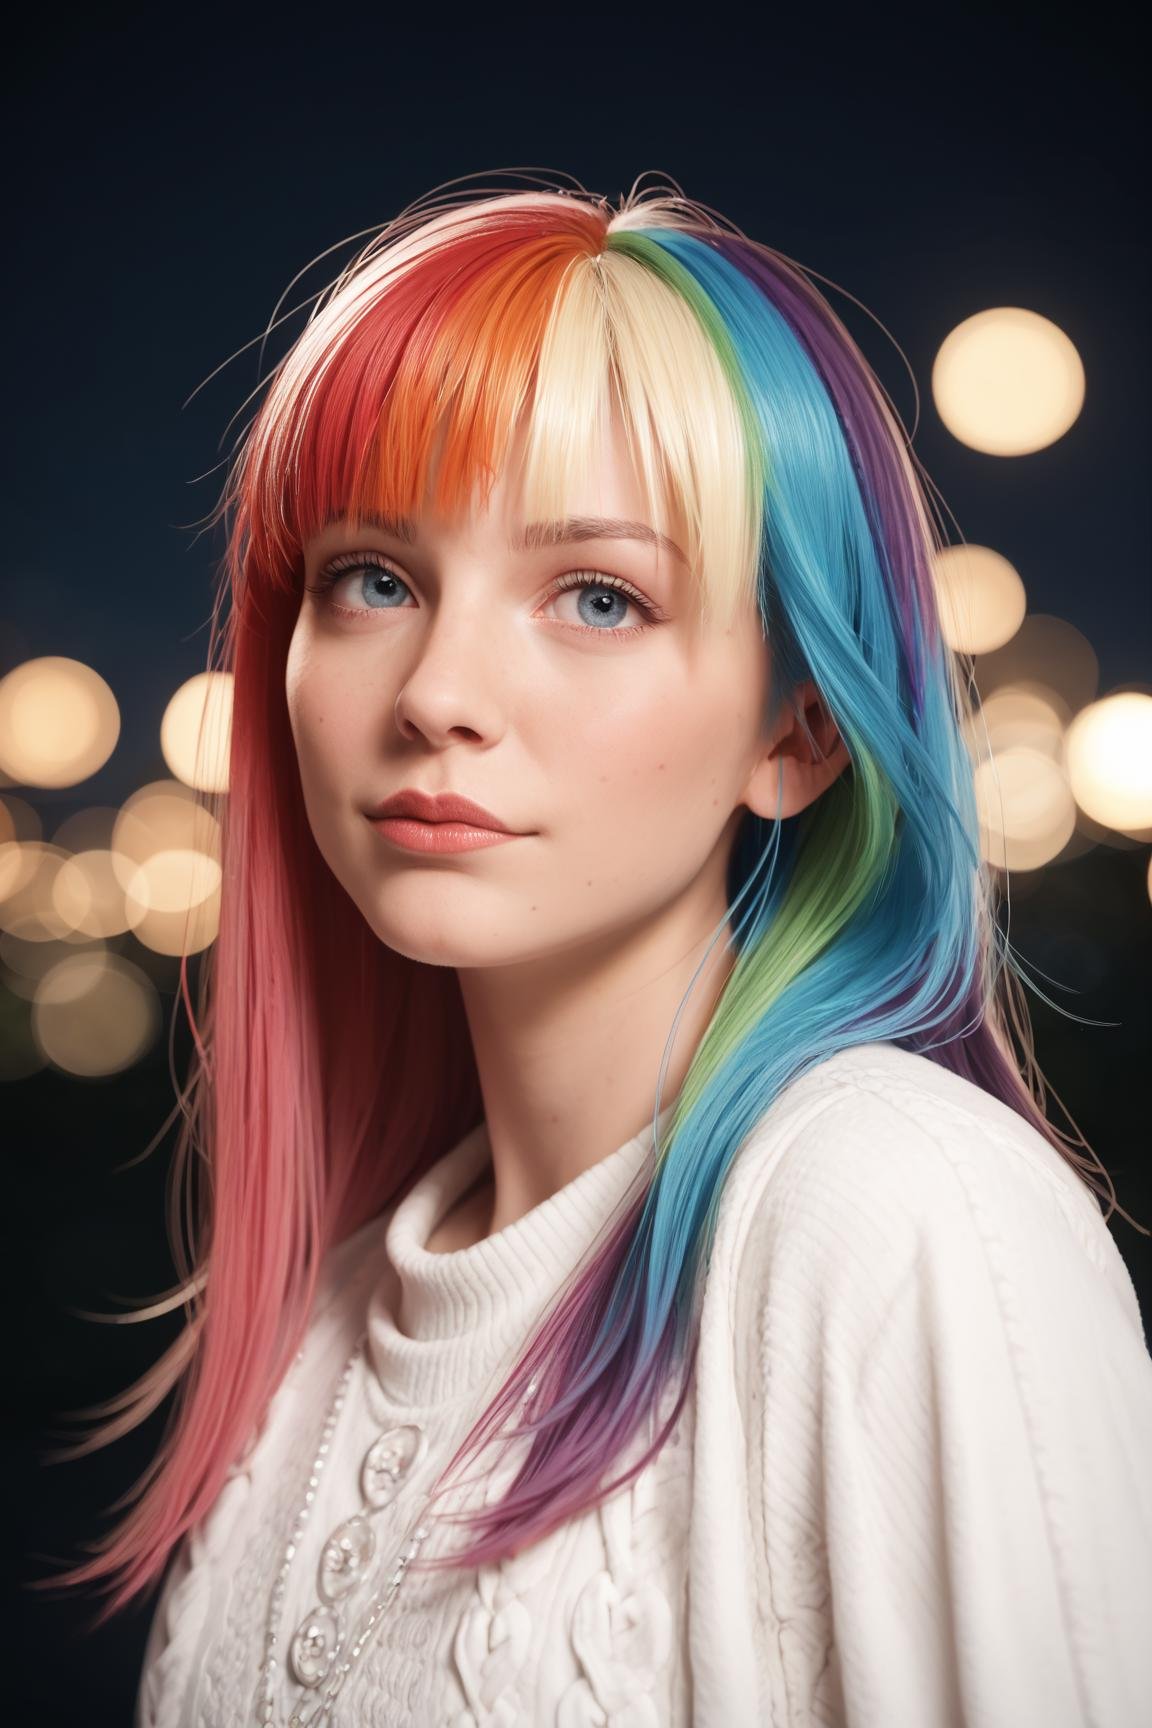 zPDXL2, zPDXLpg, zPDXLrl, beautiful girl with vivid (rainbow dye, colored hair:1.3), long hair, bangs, at a carnival at night, wearing a white sweater, realistic photograph, professional photographer, depth of field, bokeh